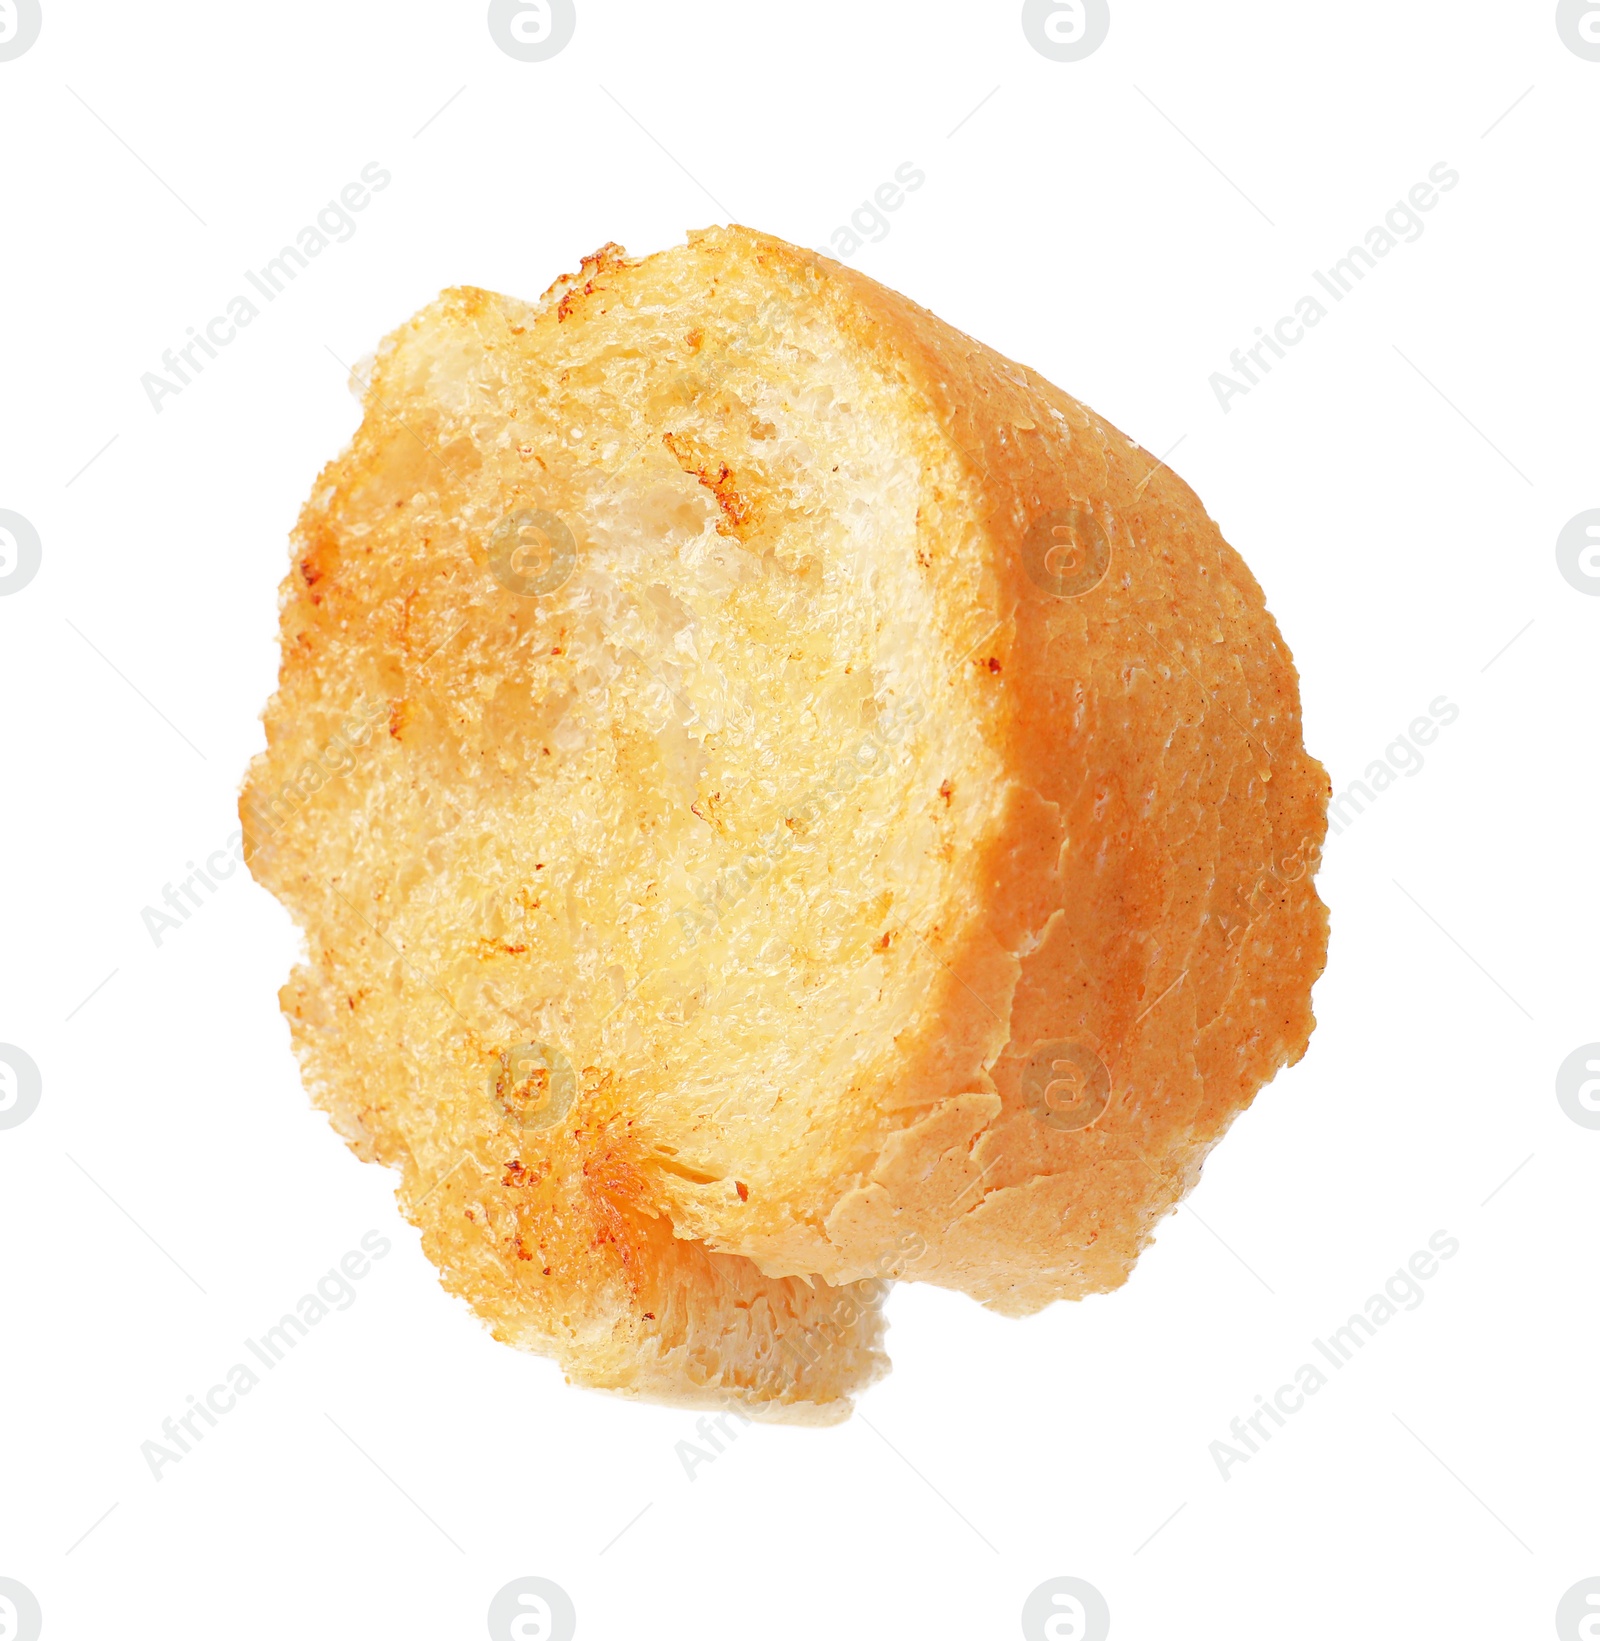 Photo of Piece of toasted bread isolated on white